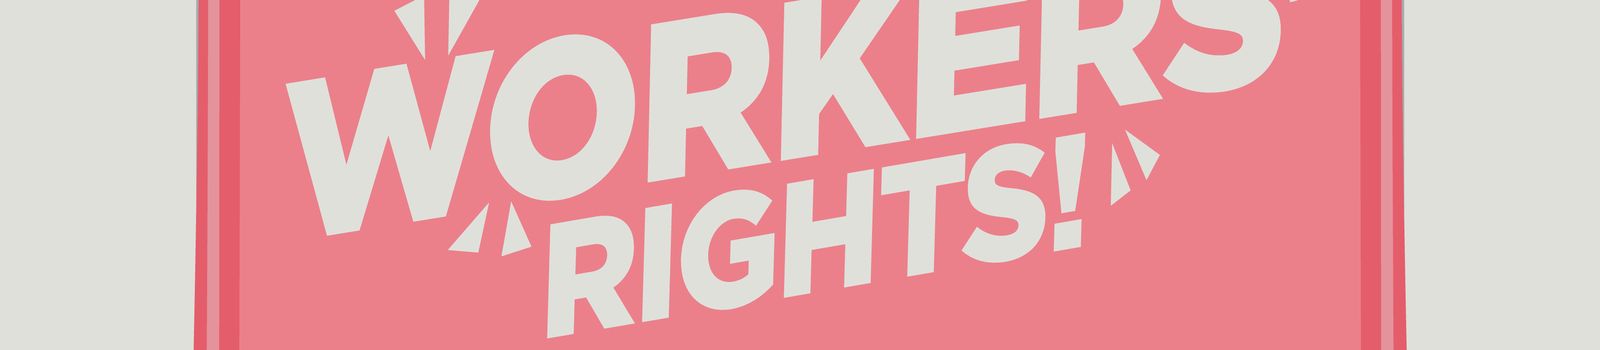 Workers Rights Banner